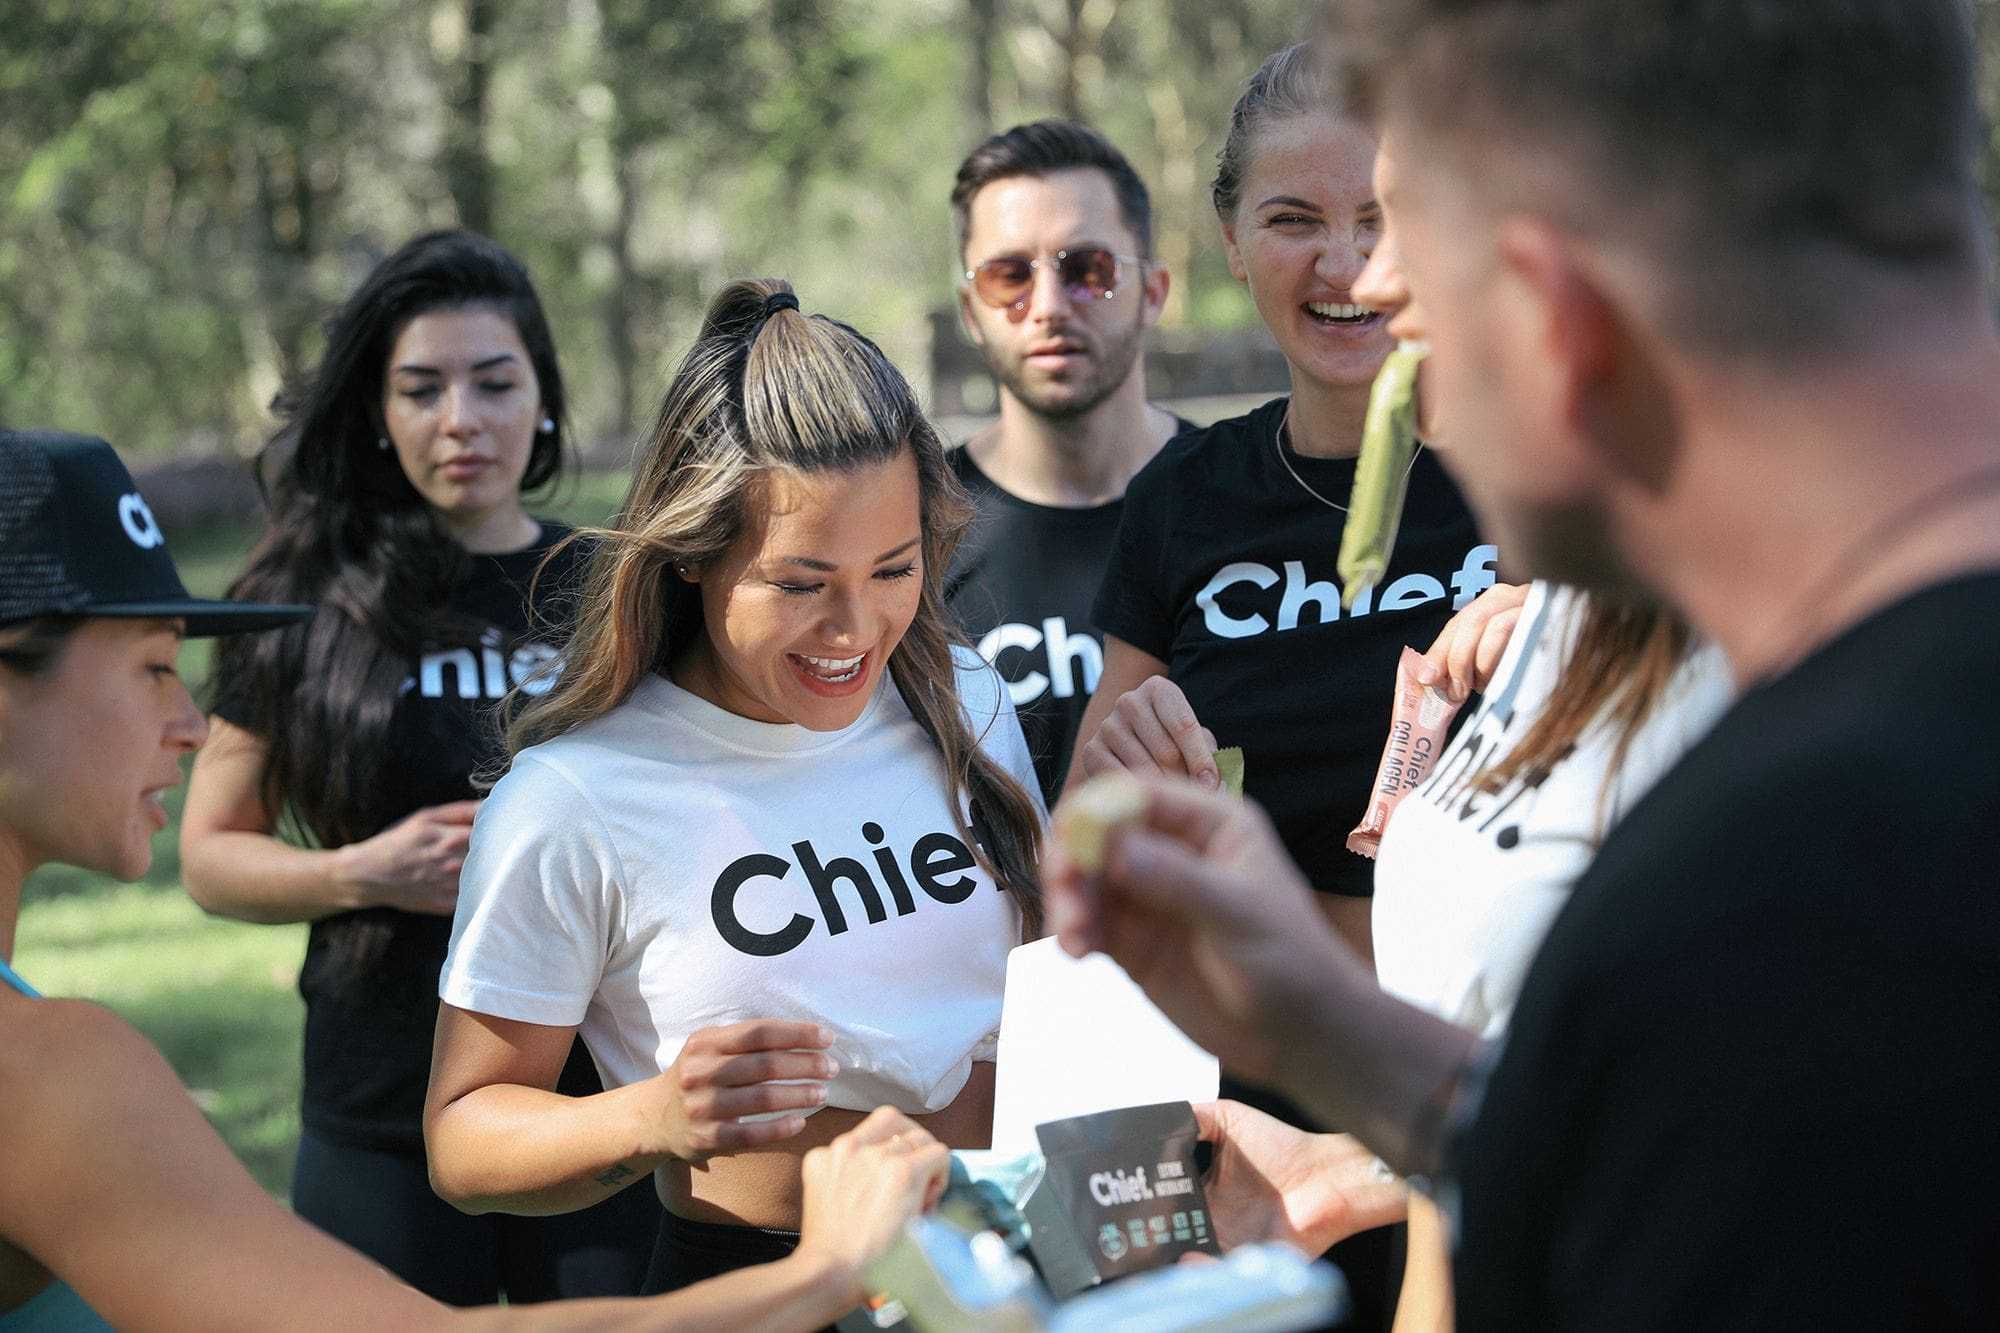 Take a bite out of Chief! Bespoke, hybrid approach for Chief’s $1.3m Seed Round